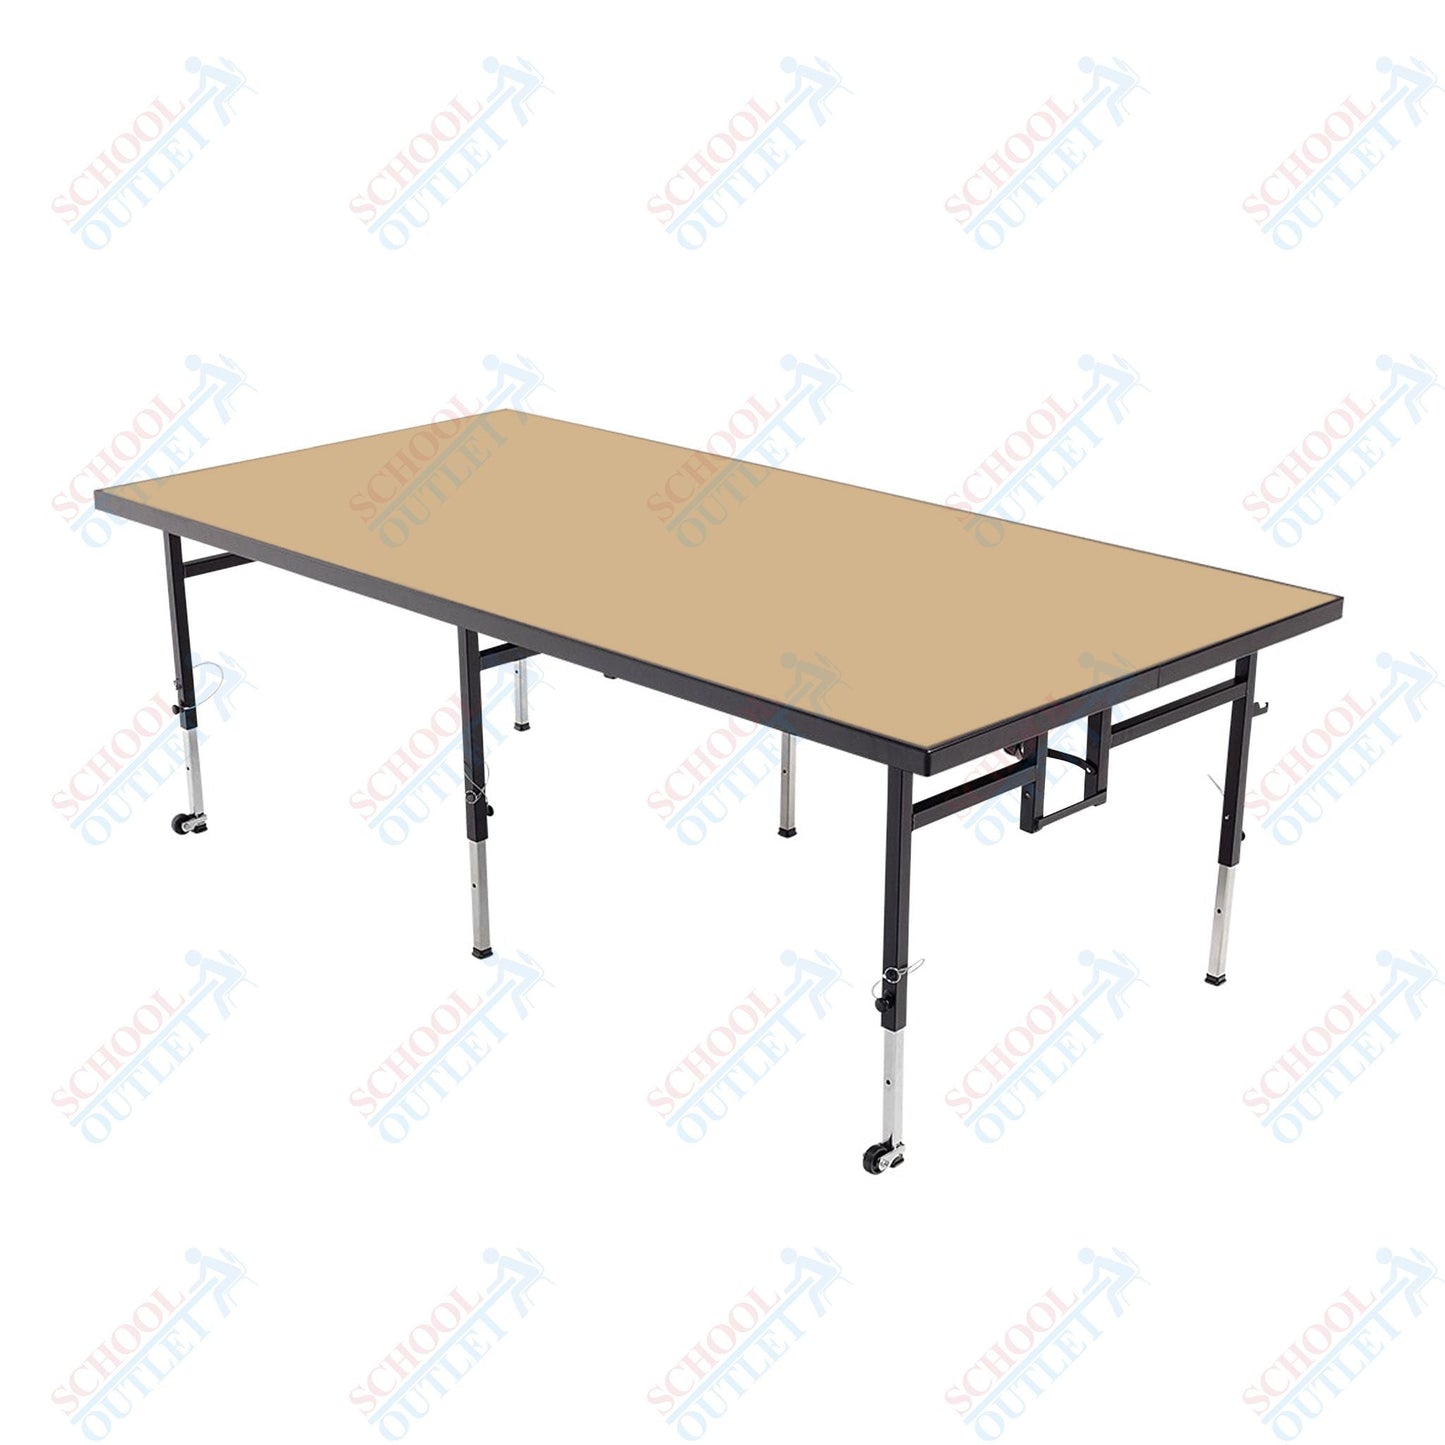 AmTab Adjustable Height Stage - Carpet Top - 48"W x 48"L x Adjustable 24" to 32"H (AmTab AMT-STA4424C) - SchoolOutlet